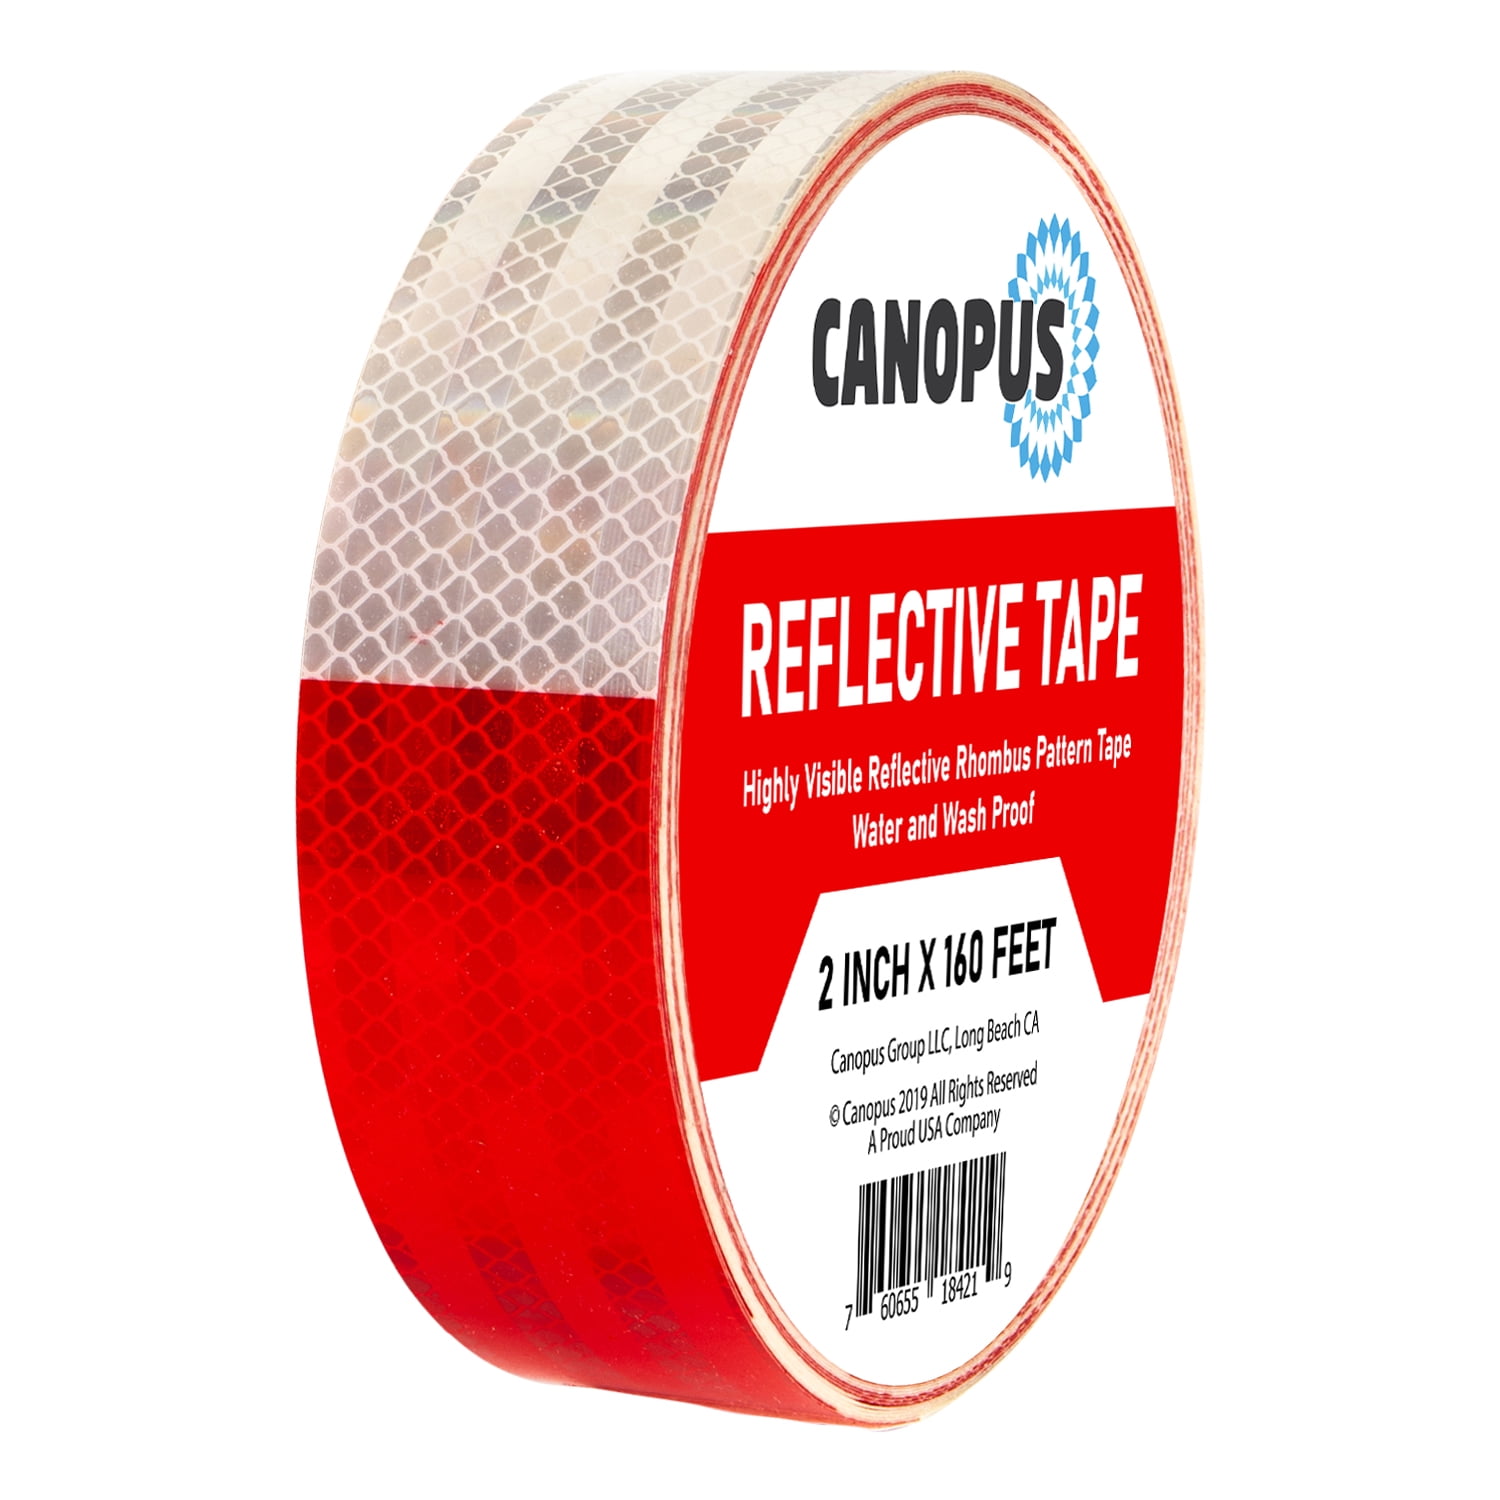 Moltres DOT-C2 Reflective Tape,White Silver 2 Inch X 30 Feet Waterproof Conspicuity Safety Tape,Trailers Self Adhesive Warning Caution Reflector tape for Cars Trucks Trailer Vehicle Outdoor 